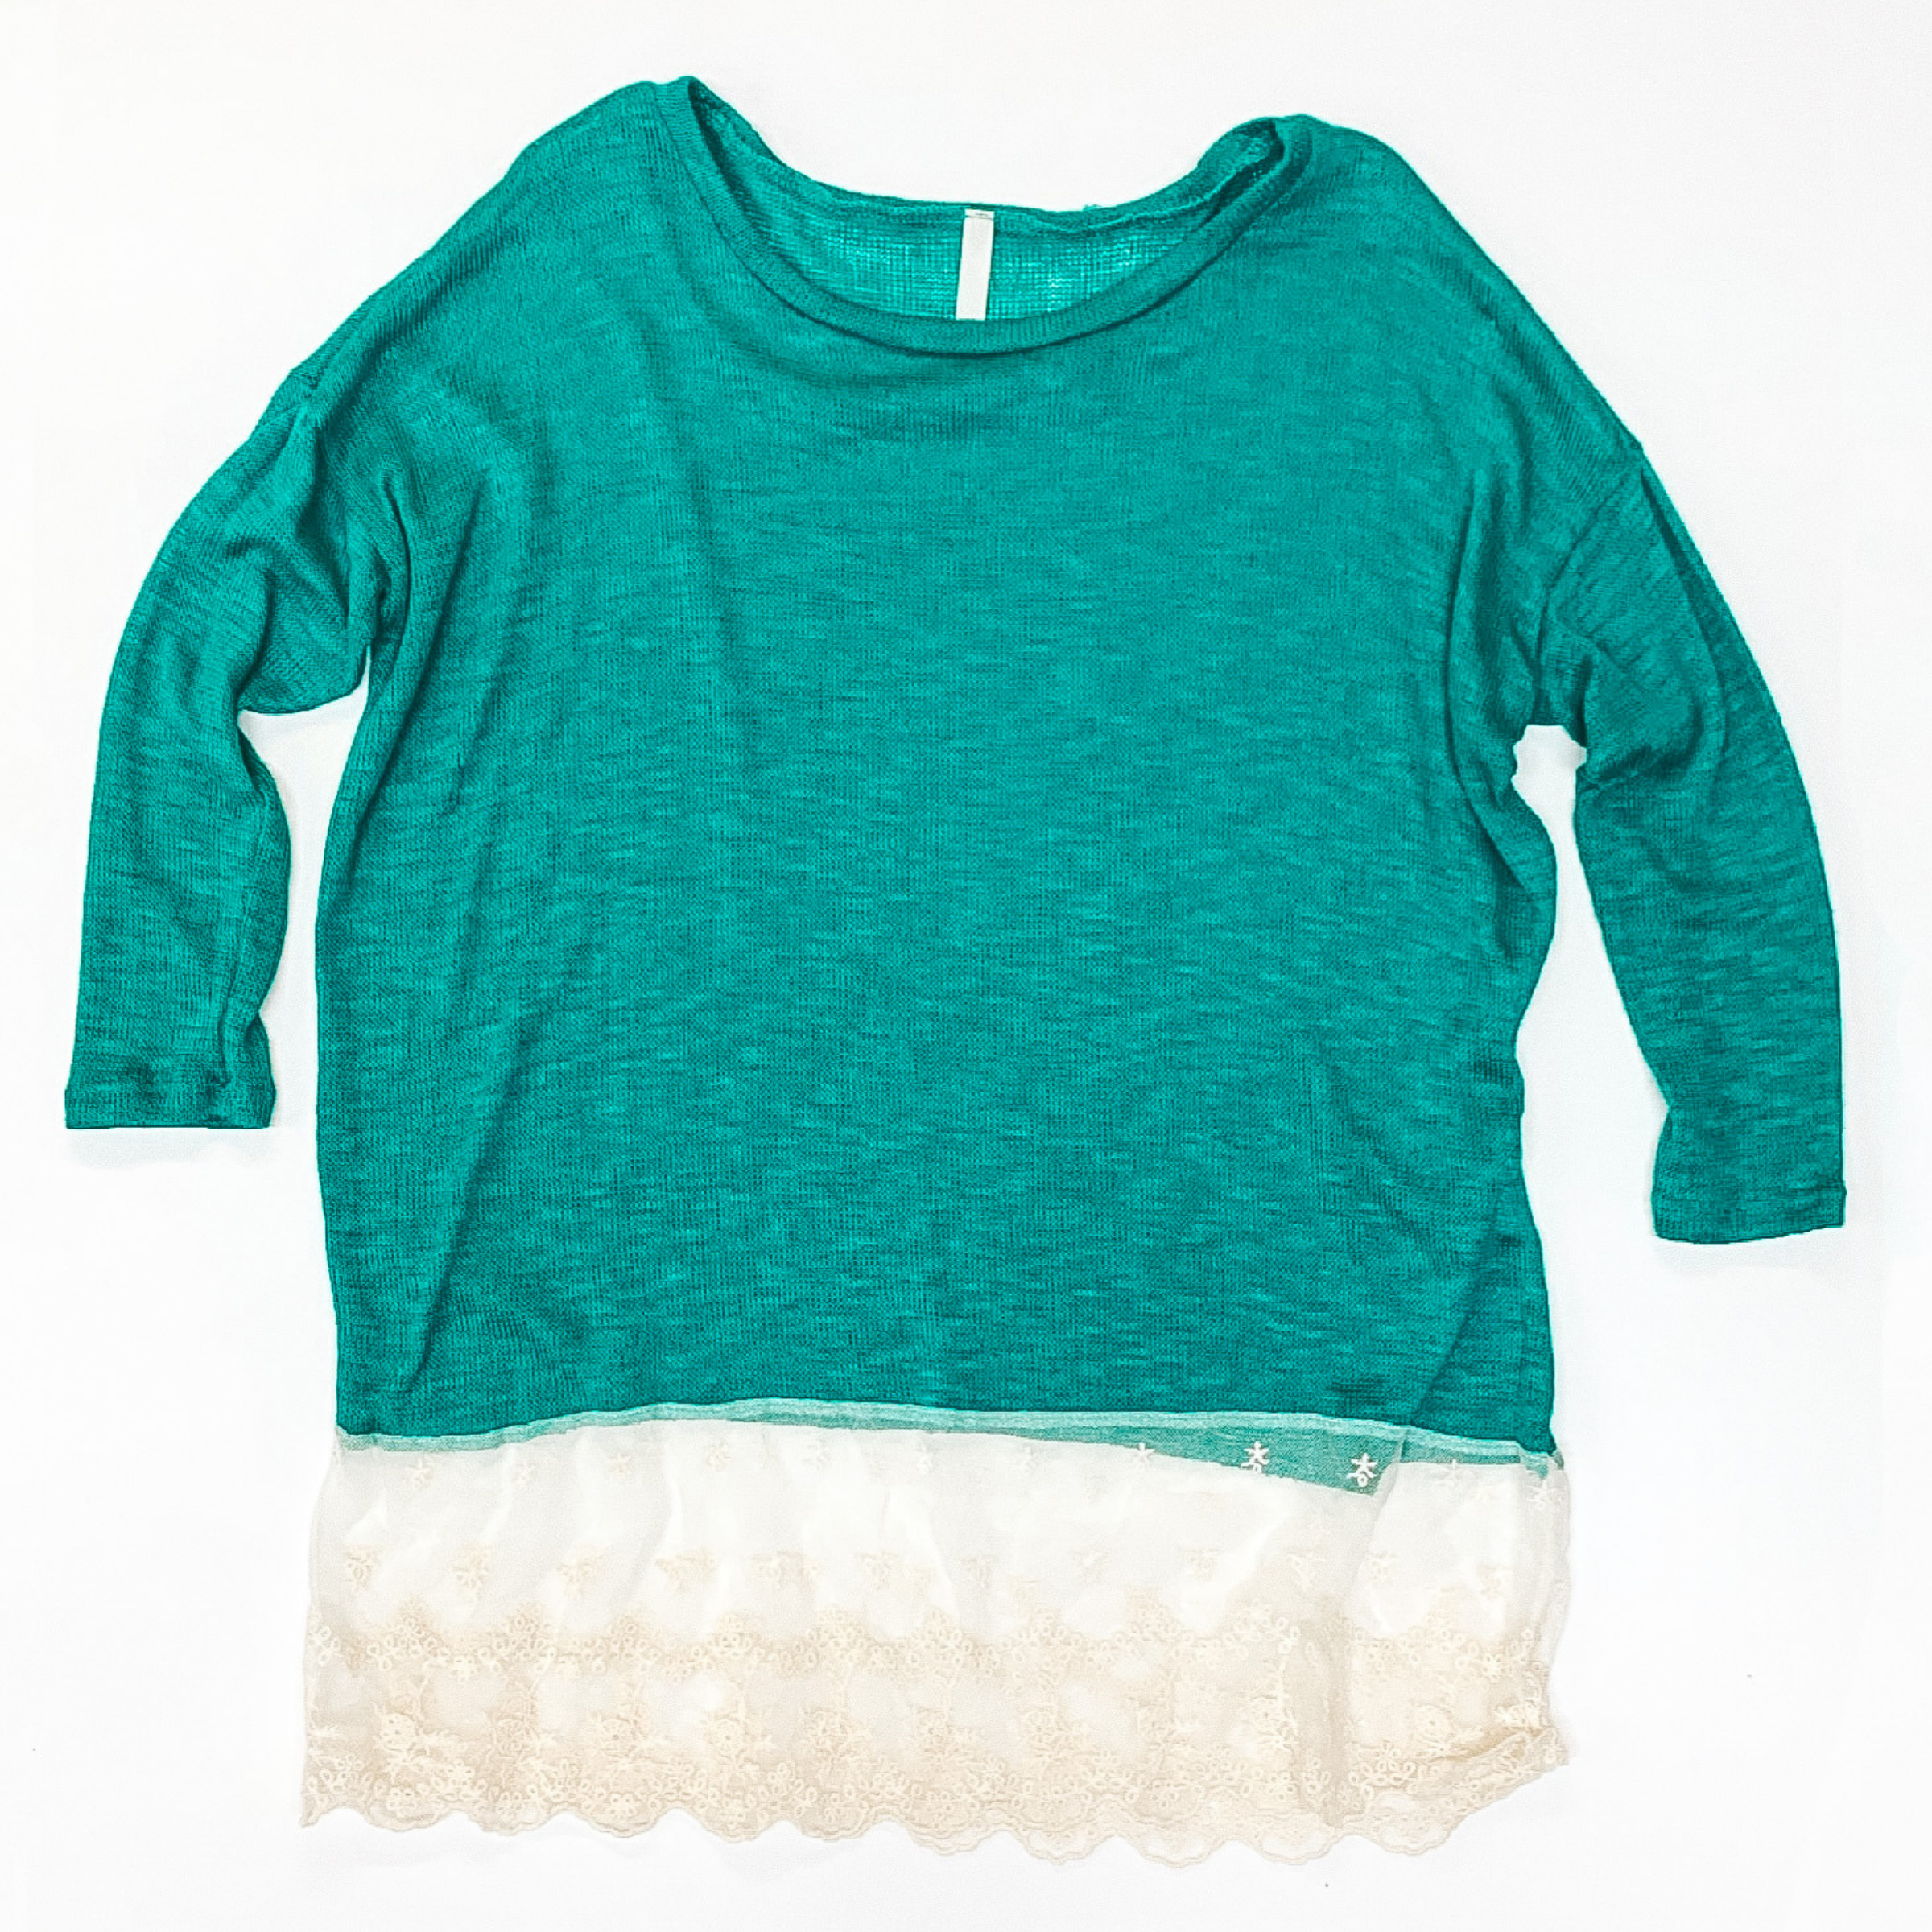 Last Chance Size Medium | Teal 3/4 Sleave Top with Ivory Lace Bottom - Giddy Up Glamour Boutique